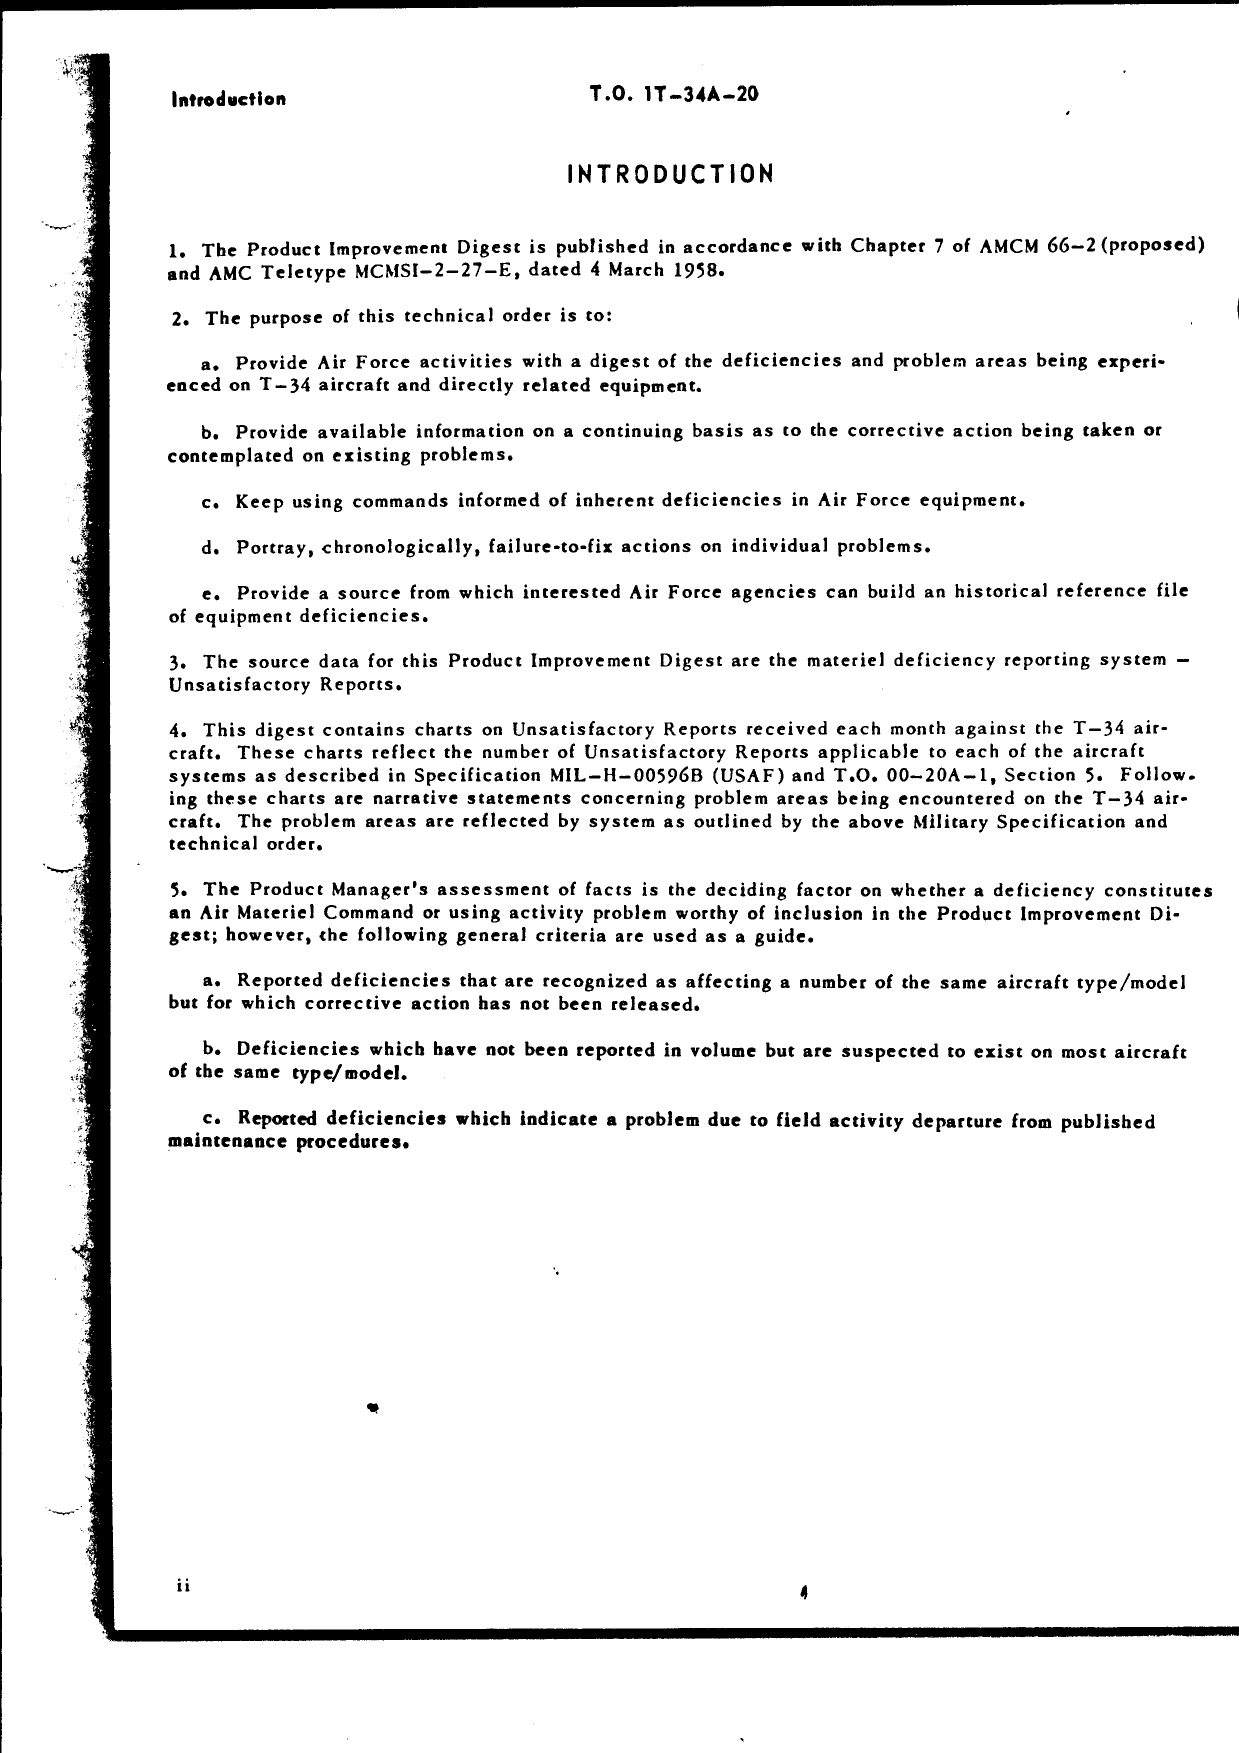 Sample page 4 from AirCorps Library document: Product Improvement Digest for T-34A Aircraft